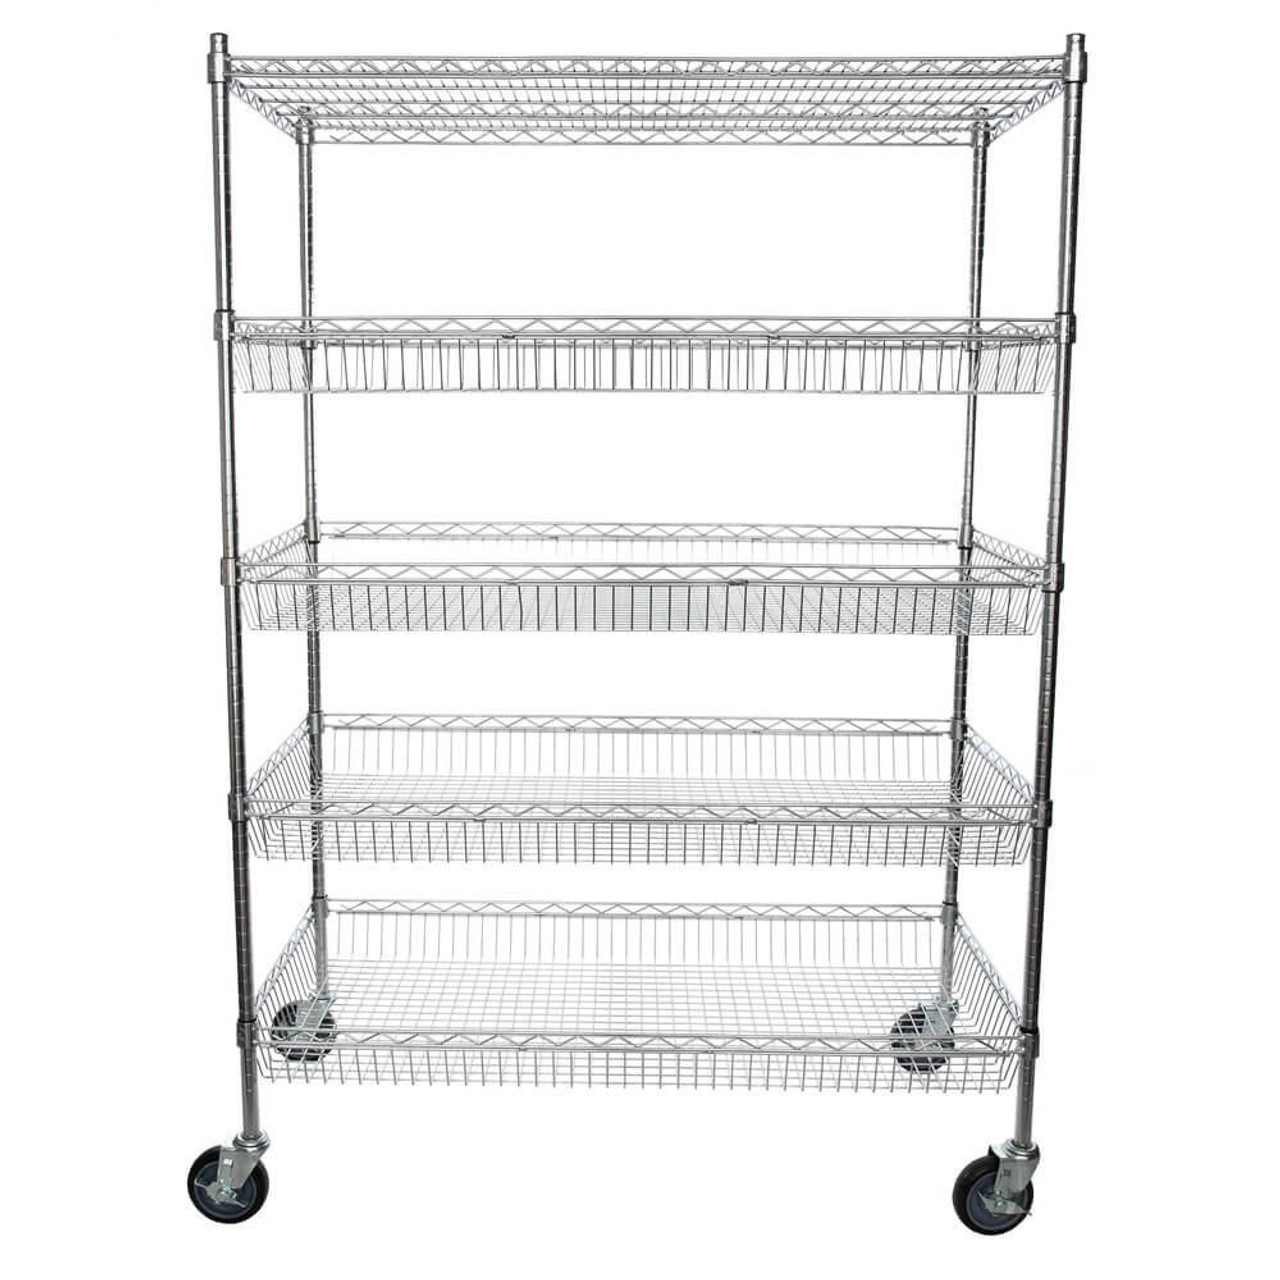 Chicken Pieces CP NSF Chrome 4 Basket and 1 Shelf Kit - 24" x 48" x 70" | Organize with Style and Durability 